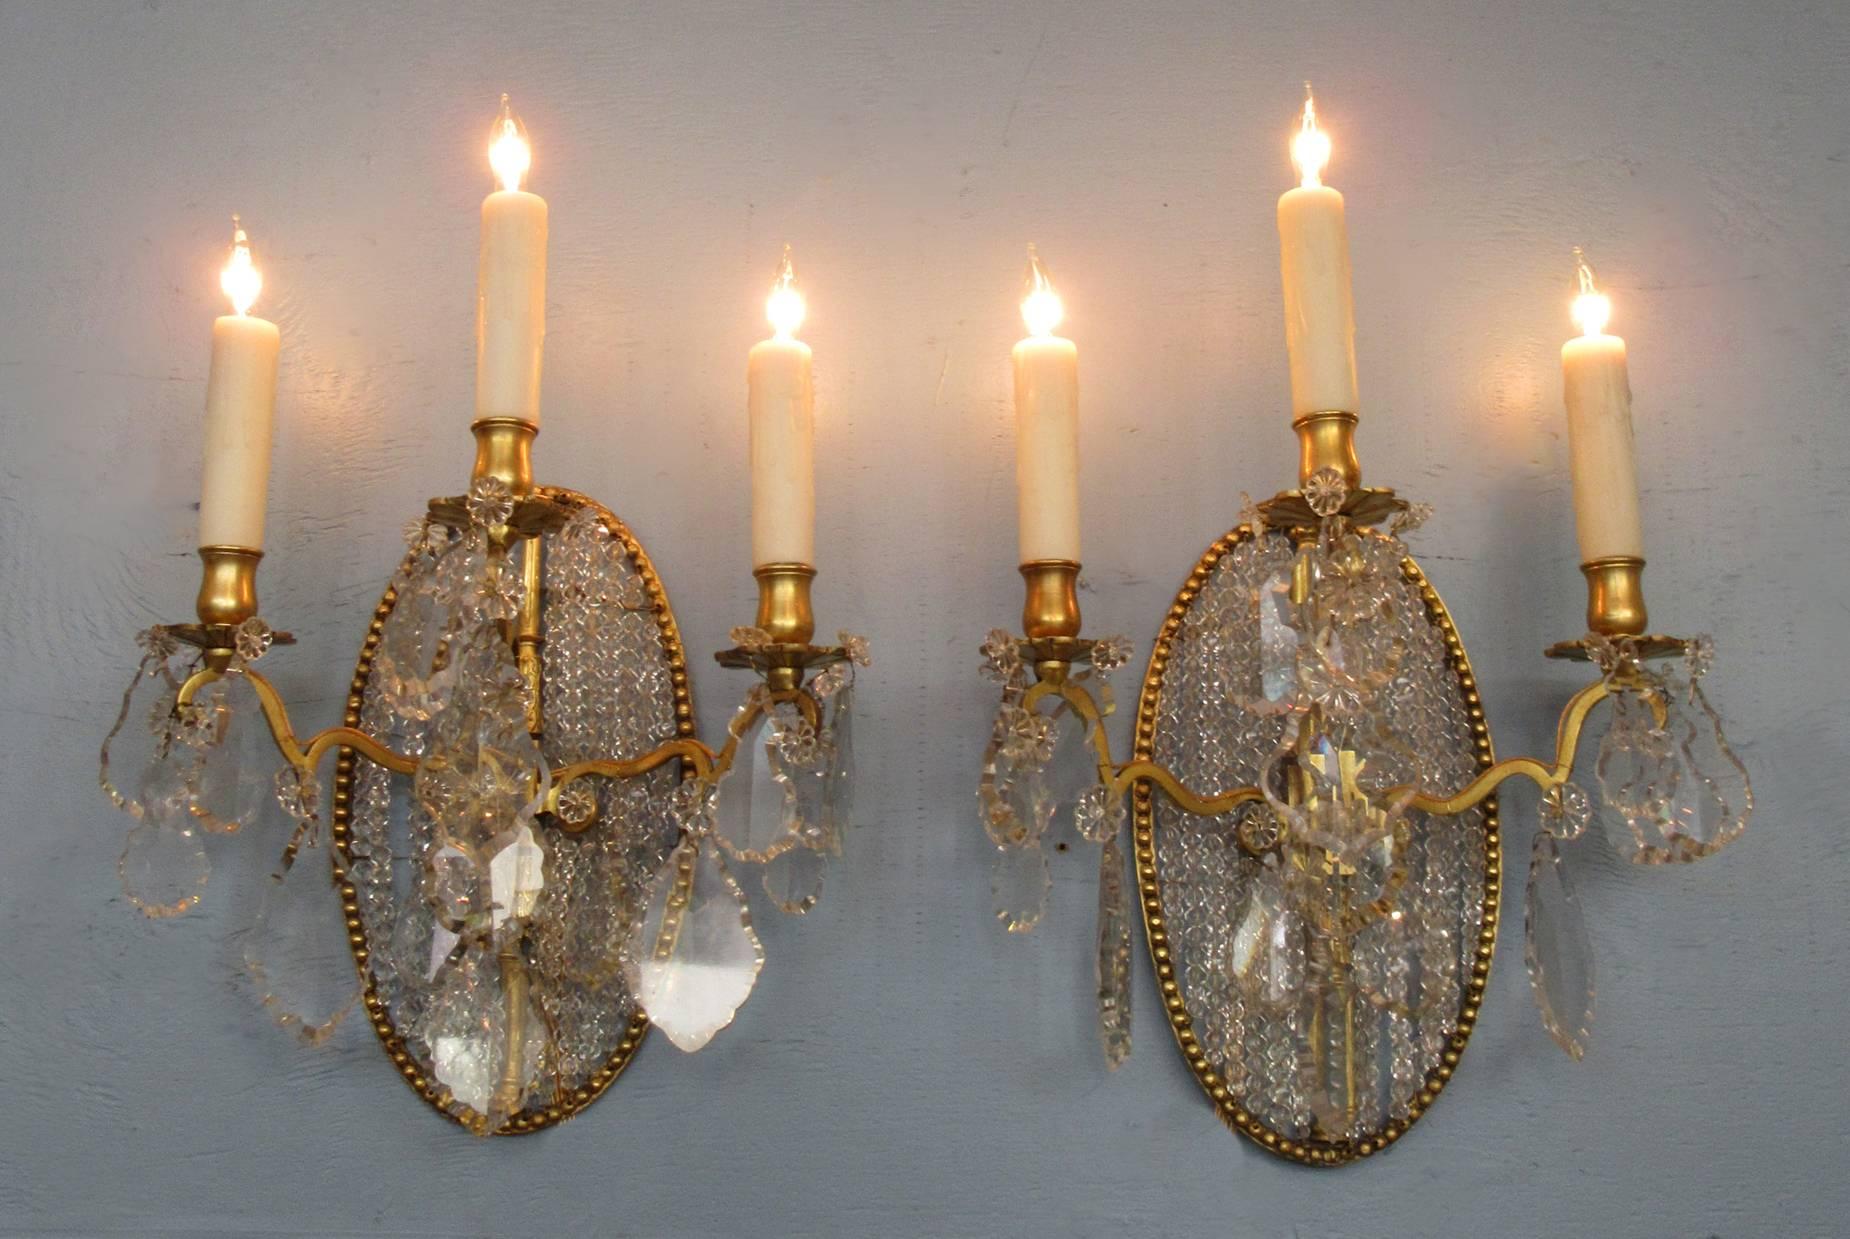 Pair of Early 19th Century Italian Neoclassical Crystal Medallion Back Sconces For Sale 2